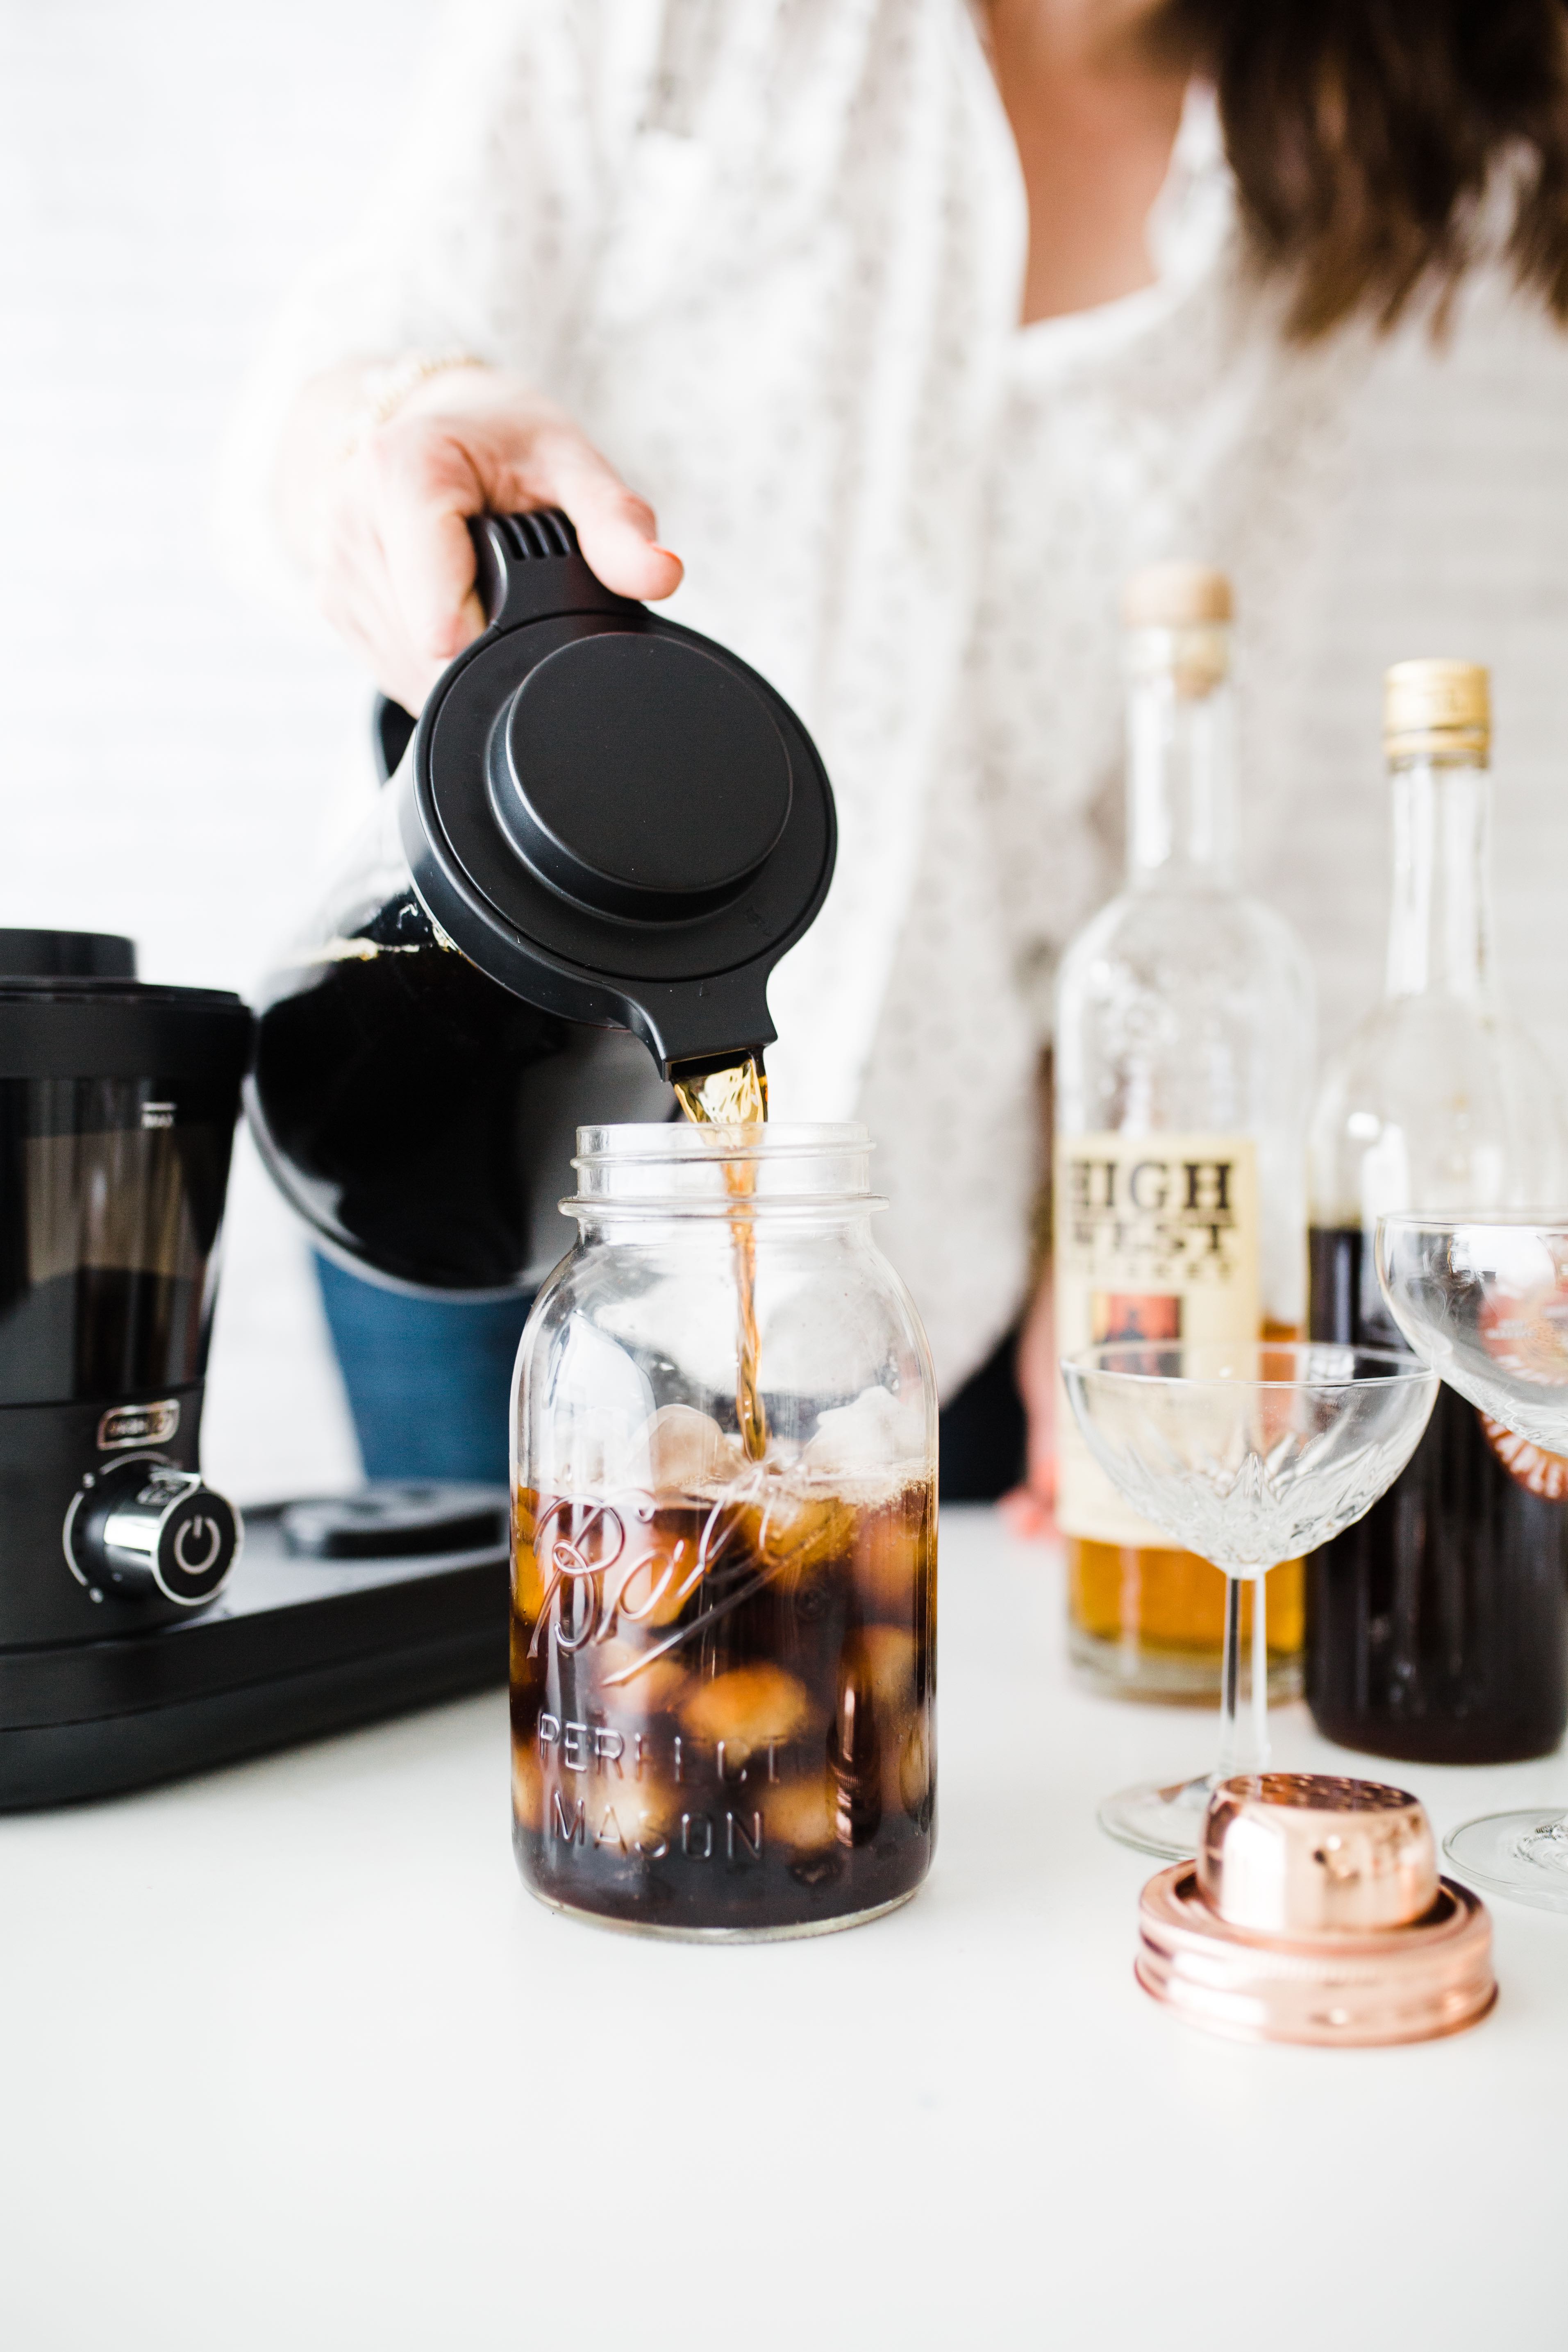 For cold brew without the wait, does the Dash Rapid Cold Brew